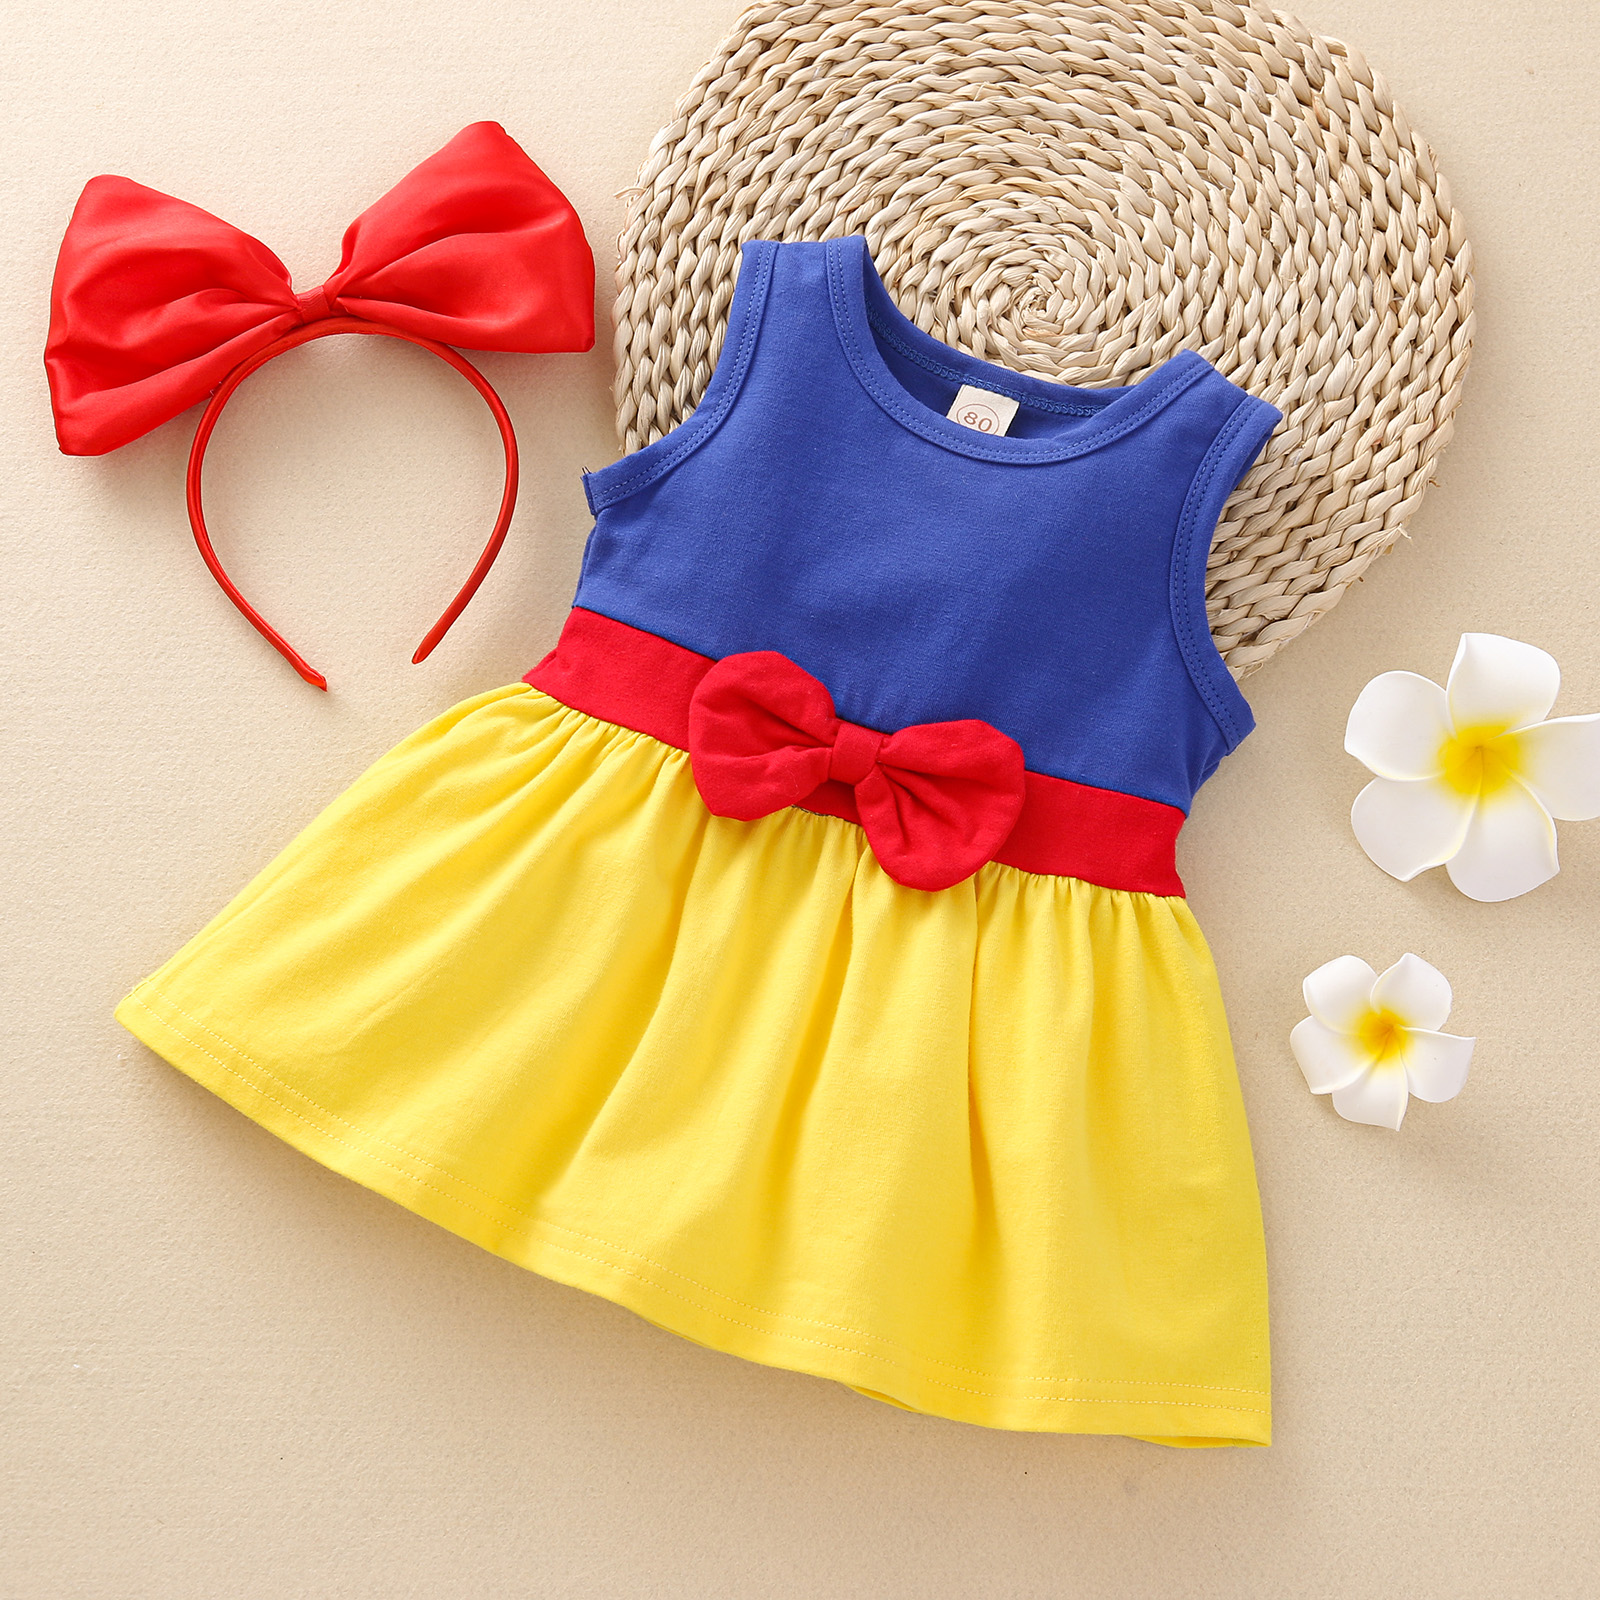 1-5Years Baby Girl Summer Outfits Sleeveless Round Neck Color Block Dress + Bow Headband 2Pcs Clothes Set